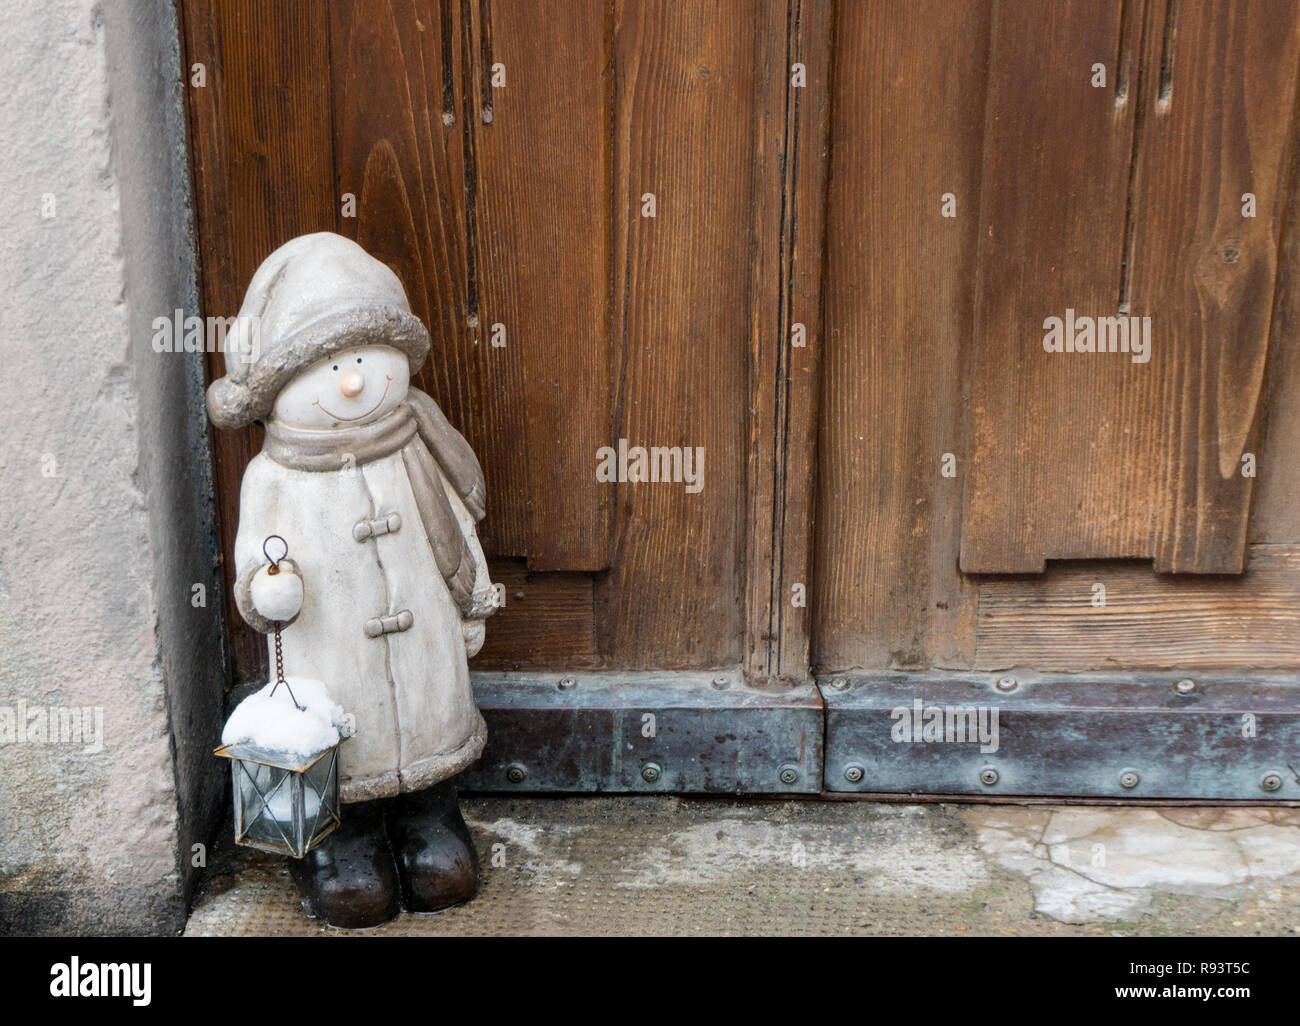 close up of a wooden door and entry with an inviting and decorative Christmas statue in the corner Stock Photo